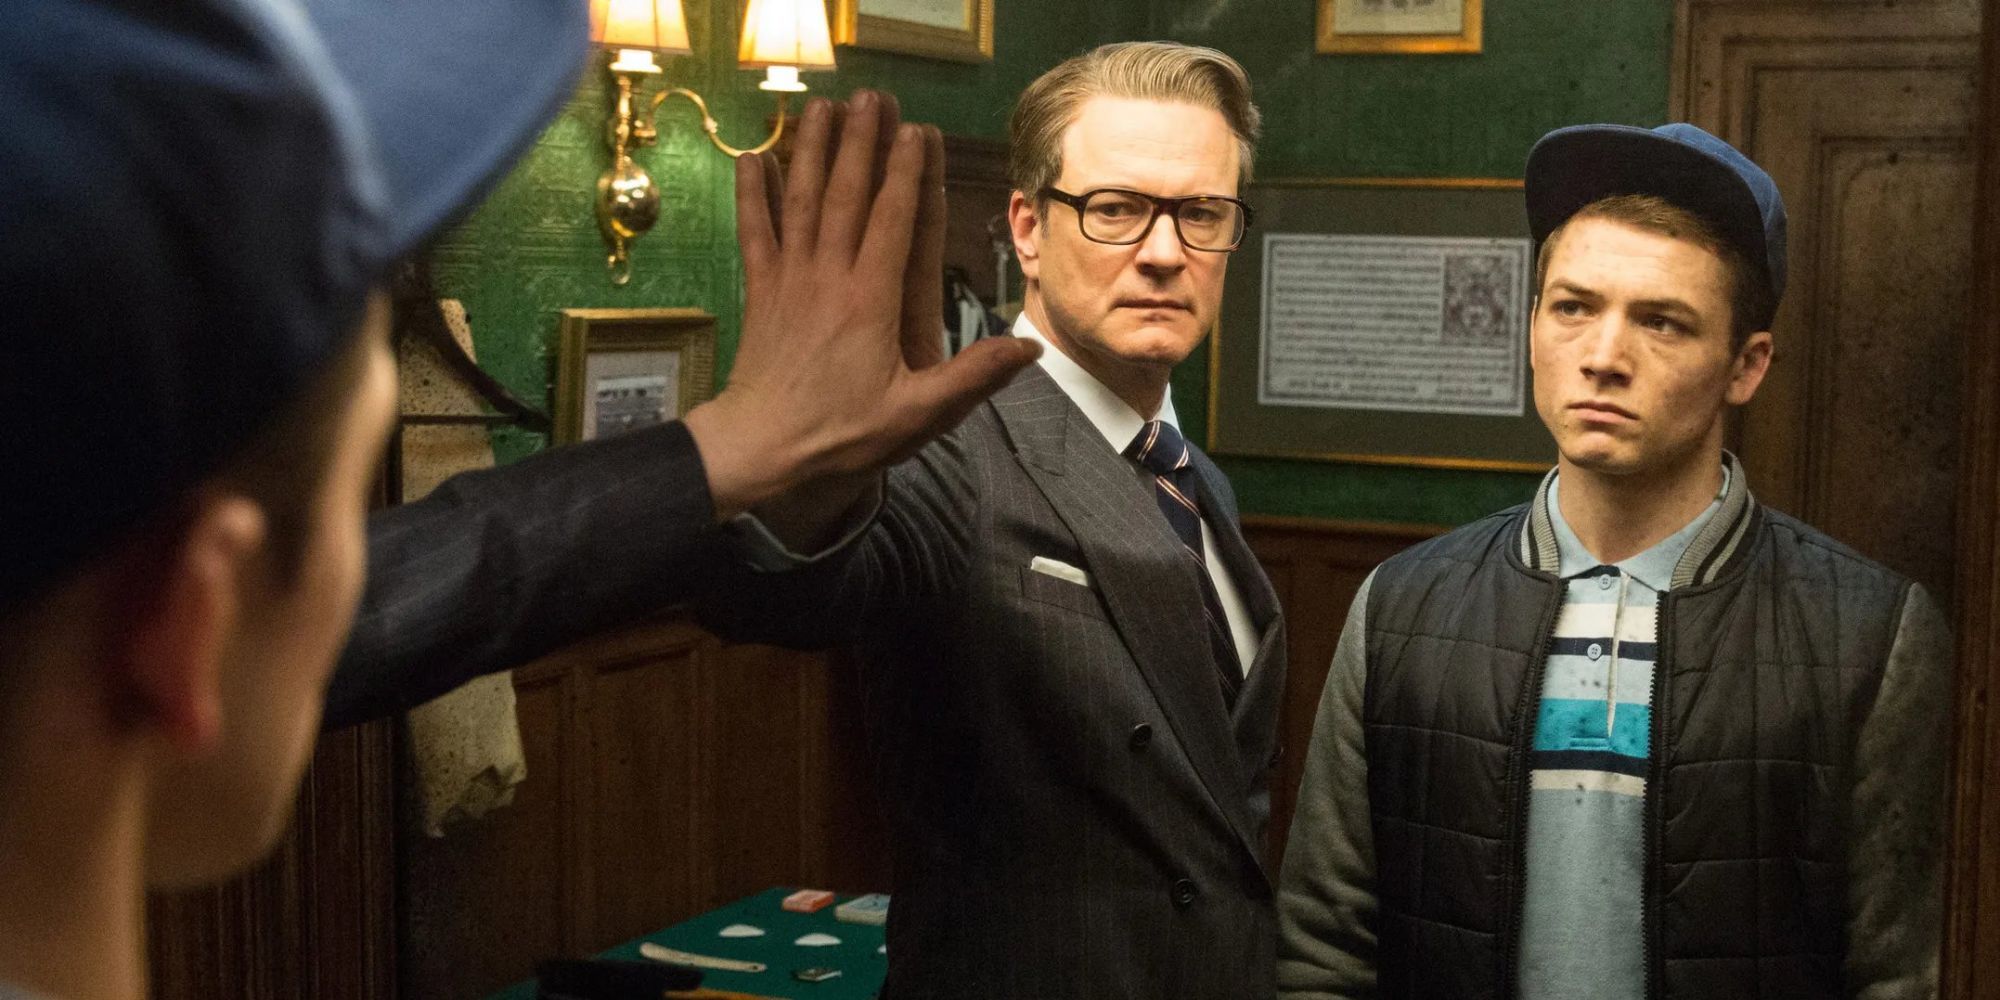 Colin Firth as Harry and Taron Egerton as Eggsy in front of a mirror in Kingsman: The Secret Service